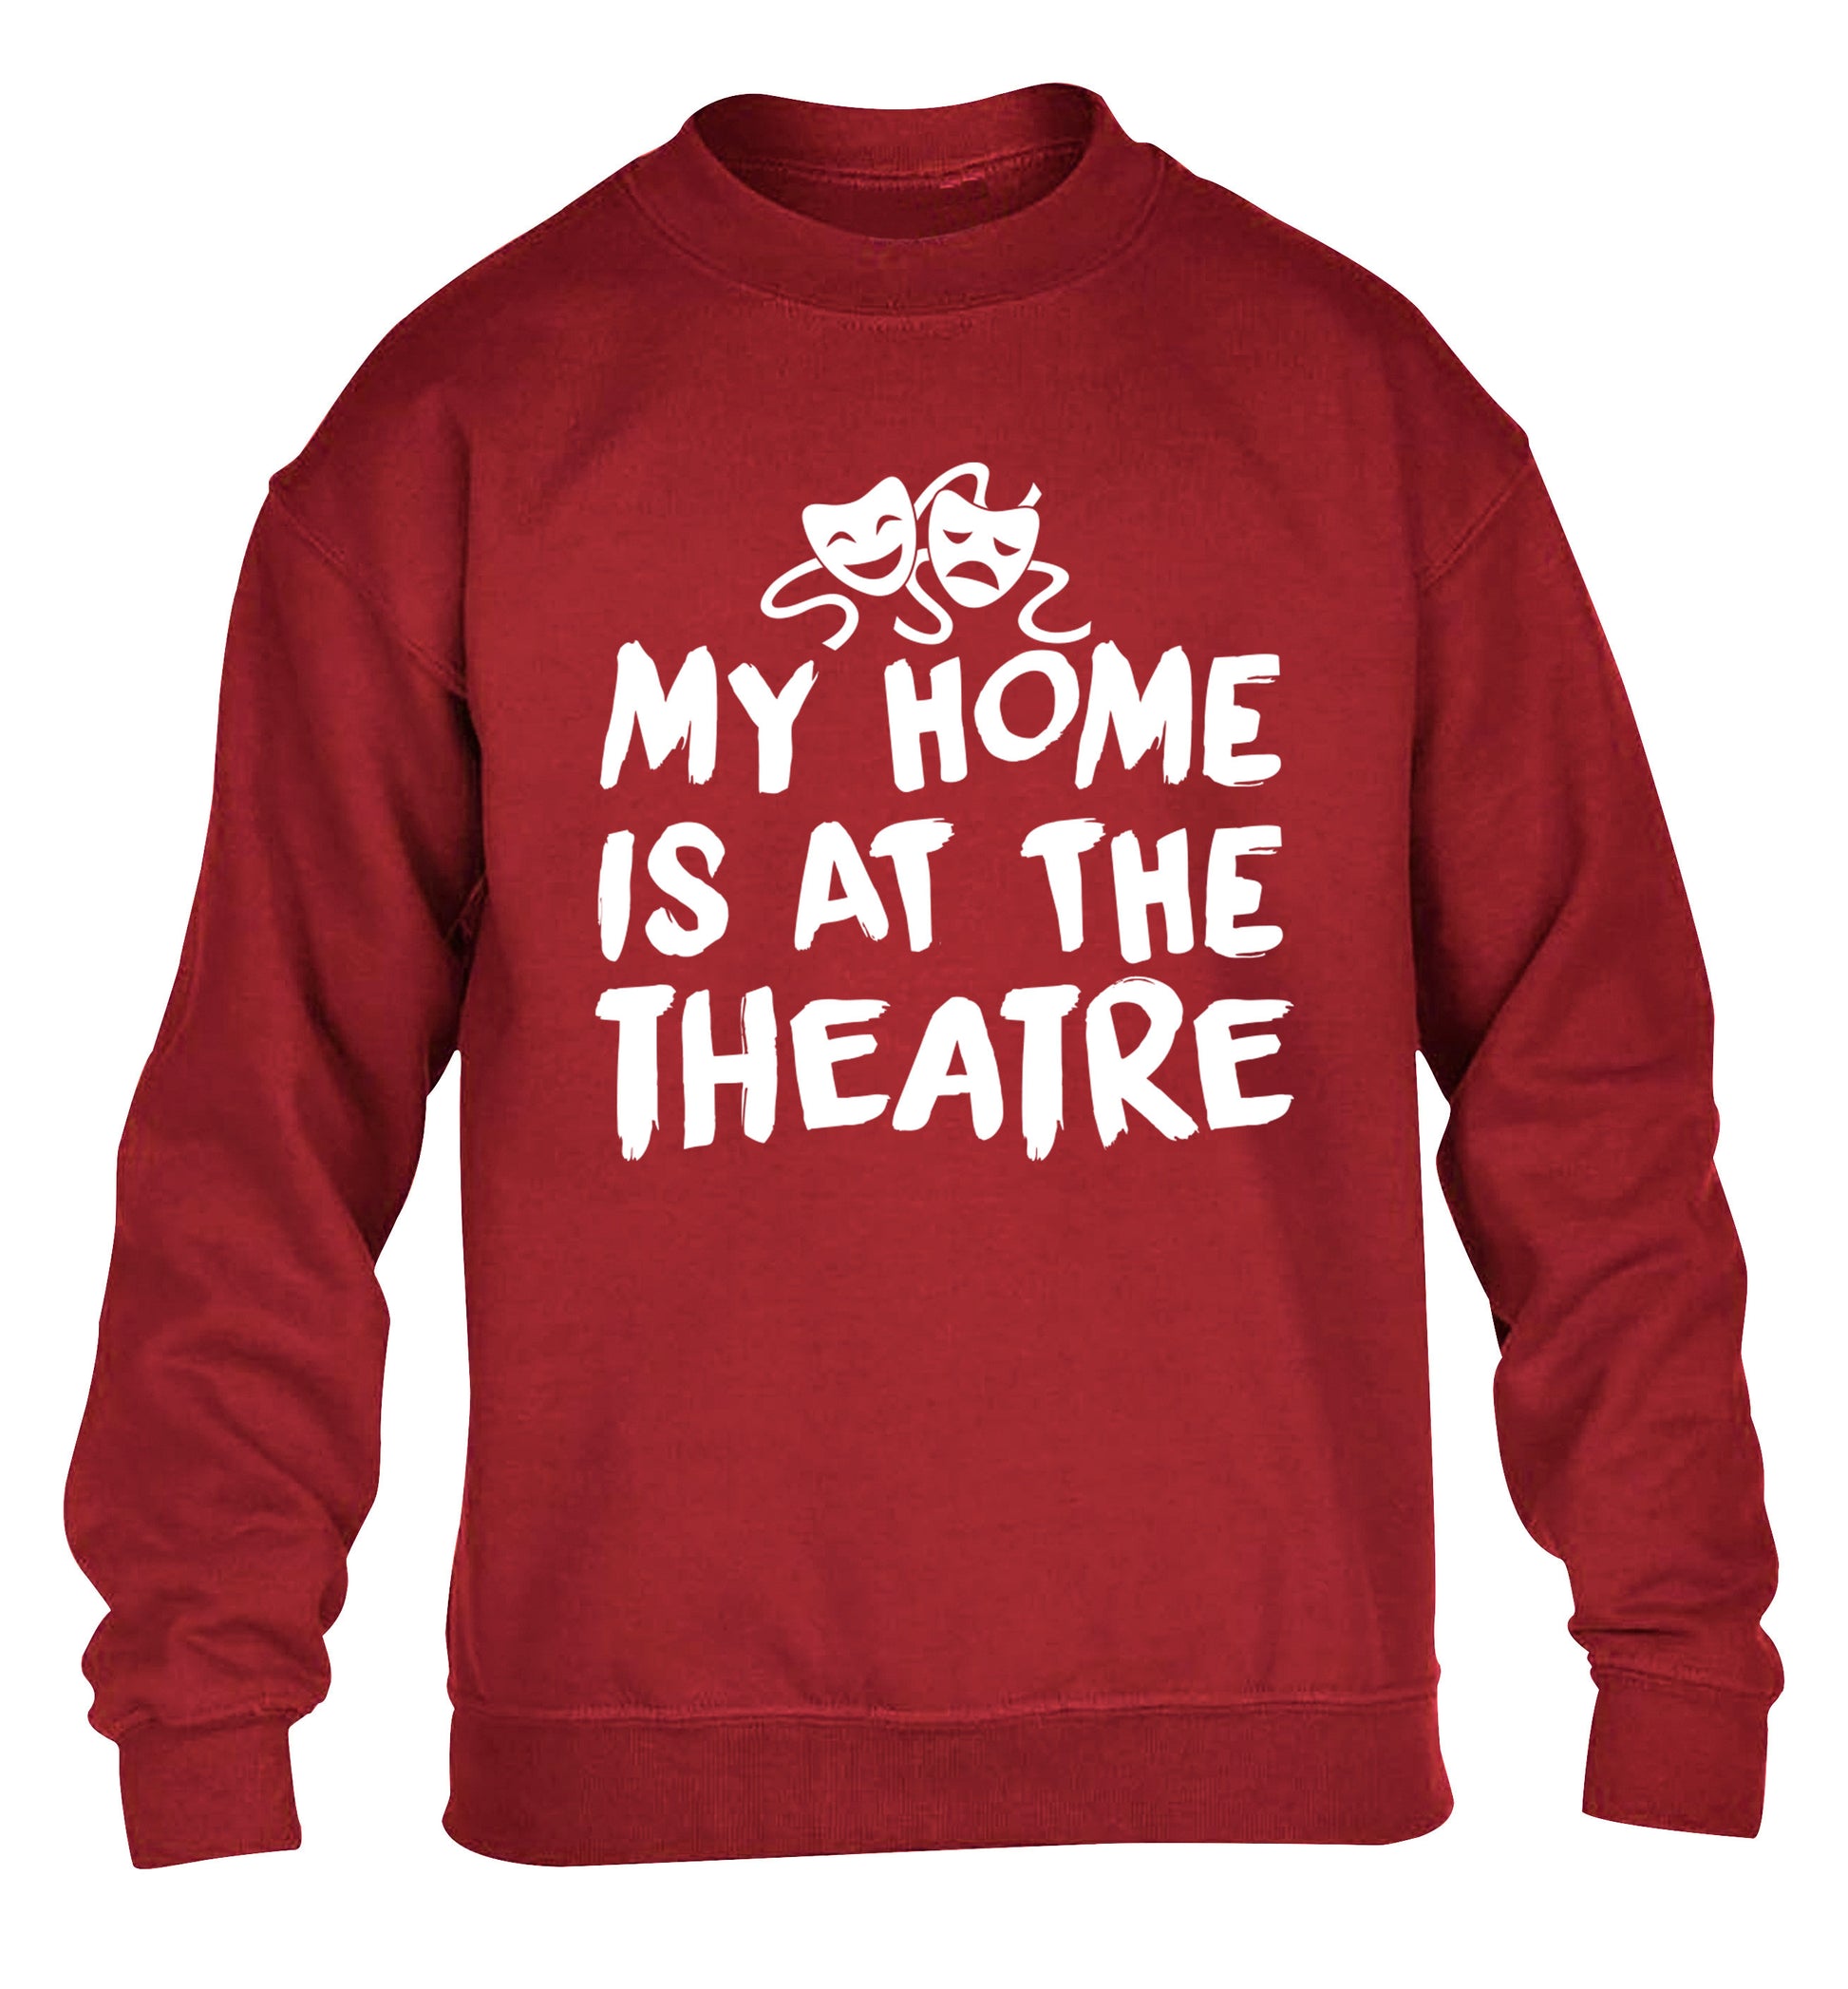 My home is at the theatre children's grey sweater 12-14 Years